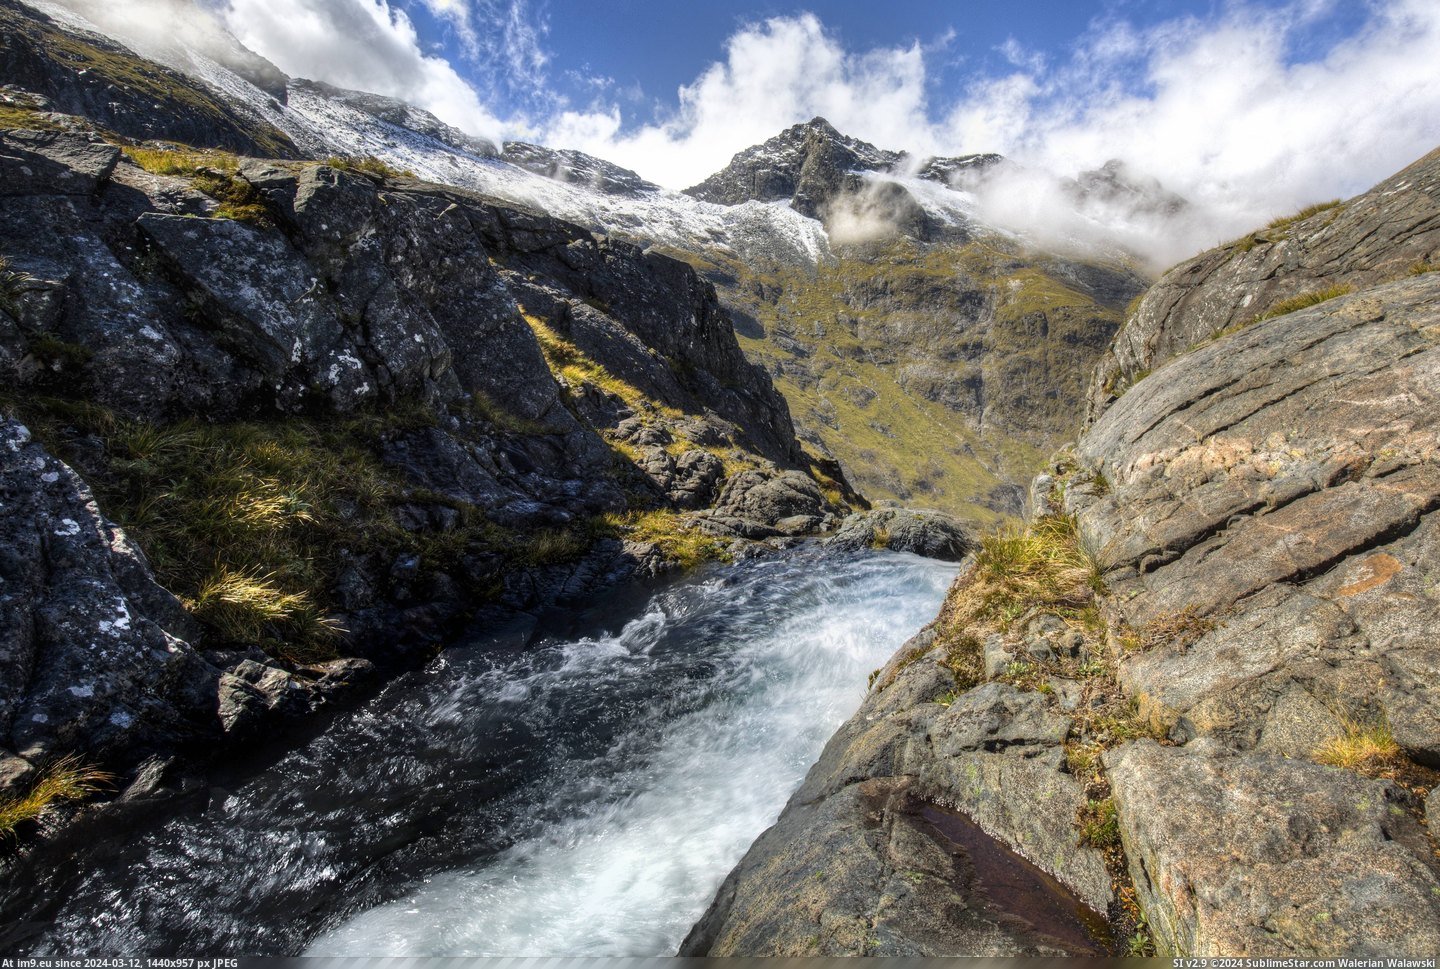 #Park #National #Fiordland #Crest #Earl #Mountains #Falls [Earthporn] At the crest of Bowmar Falls, Fiordland National Park, NZ, looking across to the Earl Mountains  [5191x3461] Pic. (Изображение из альбом My r/EARTHPORN favs))